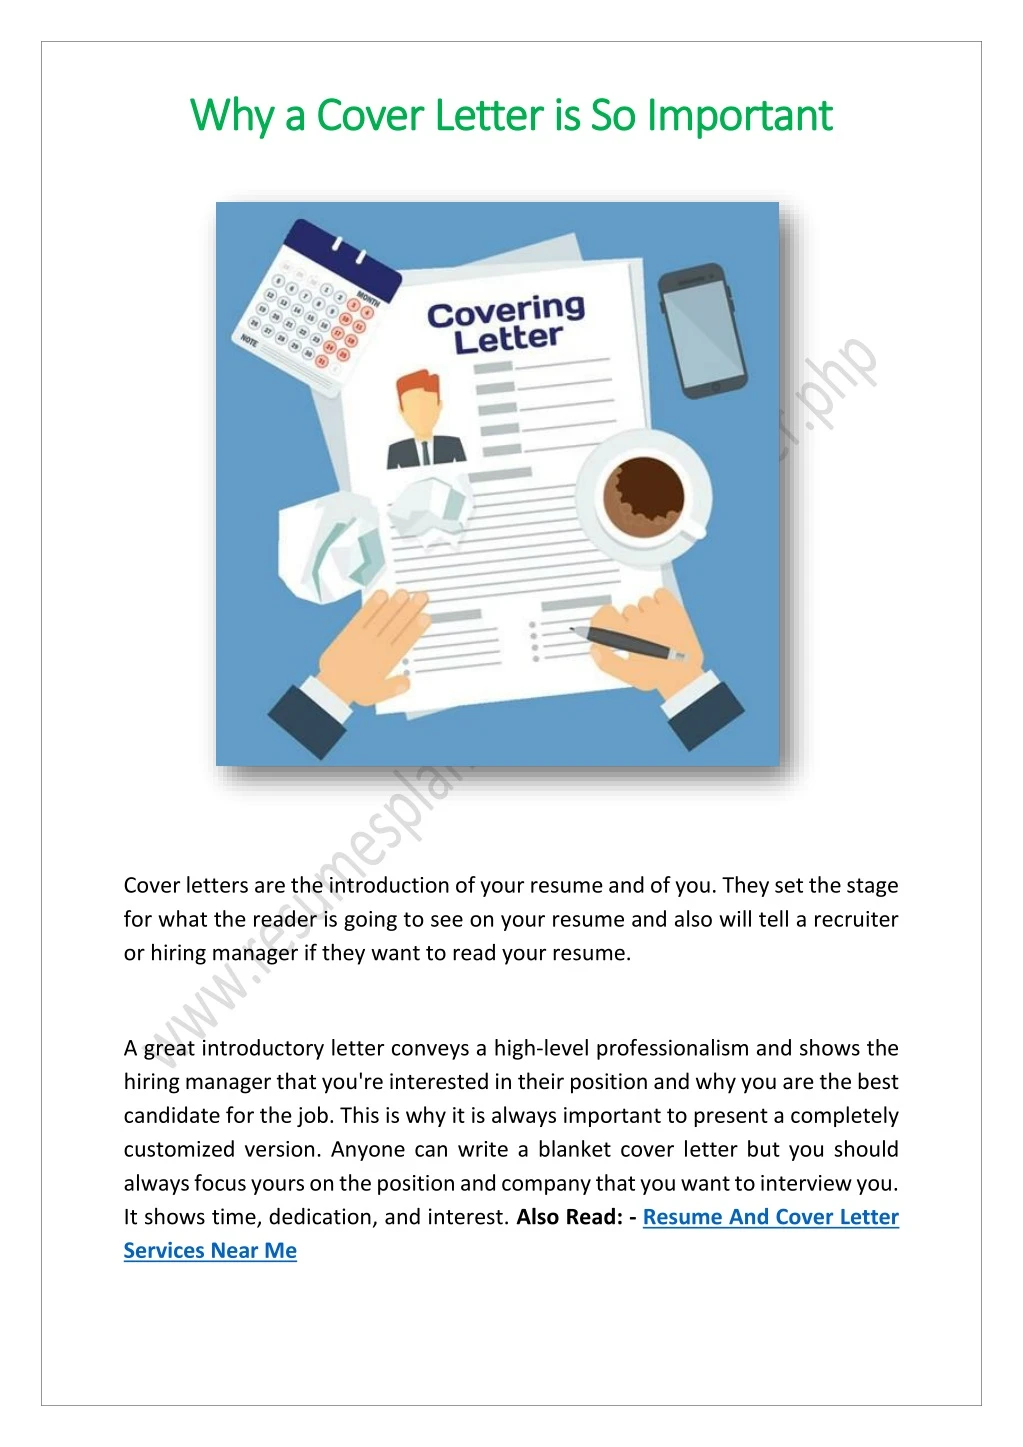 why a cover letter is so important why a cover